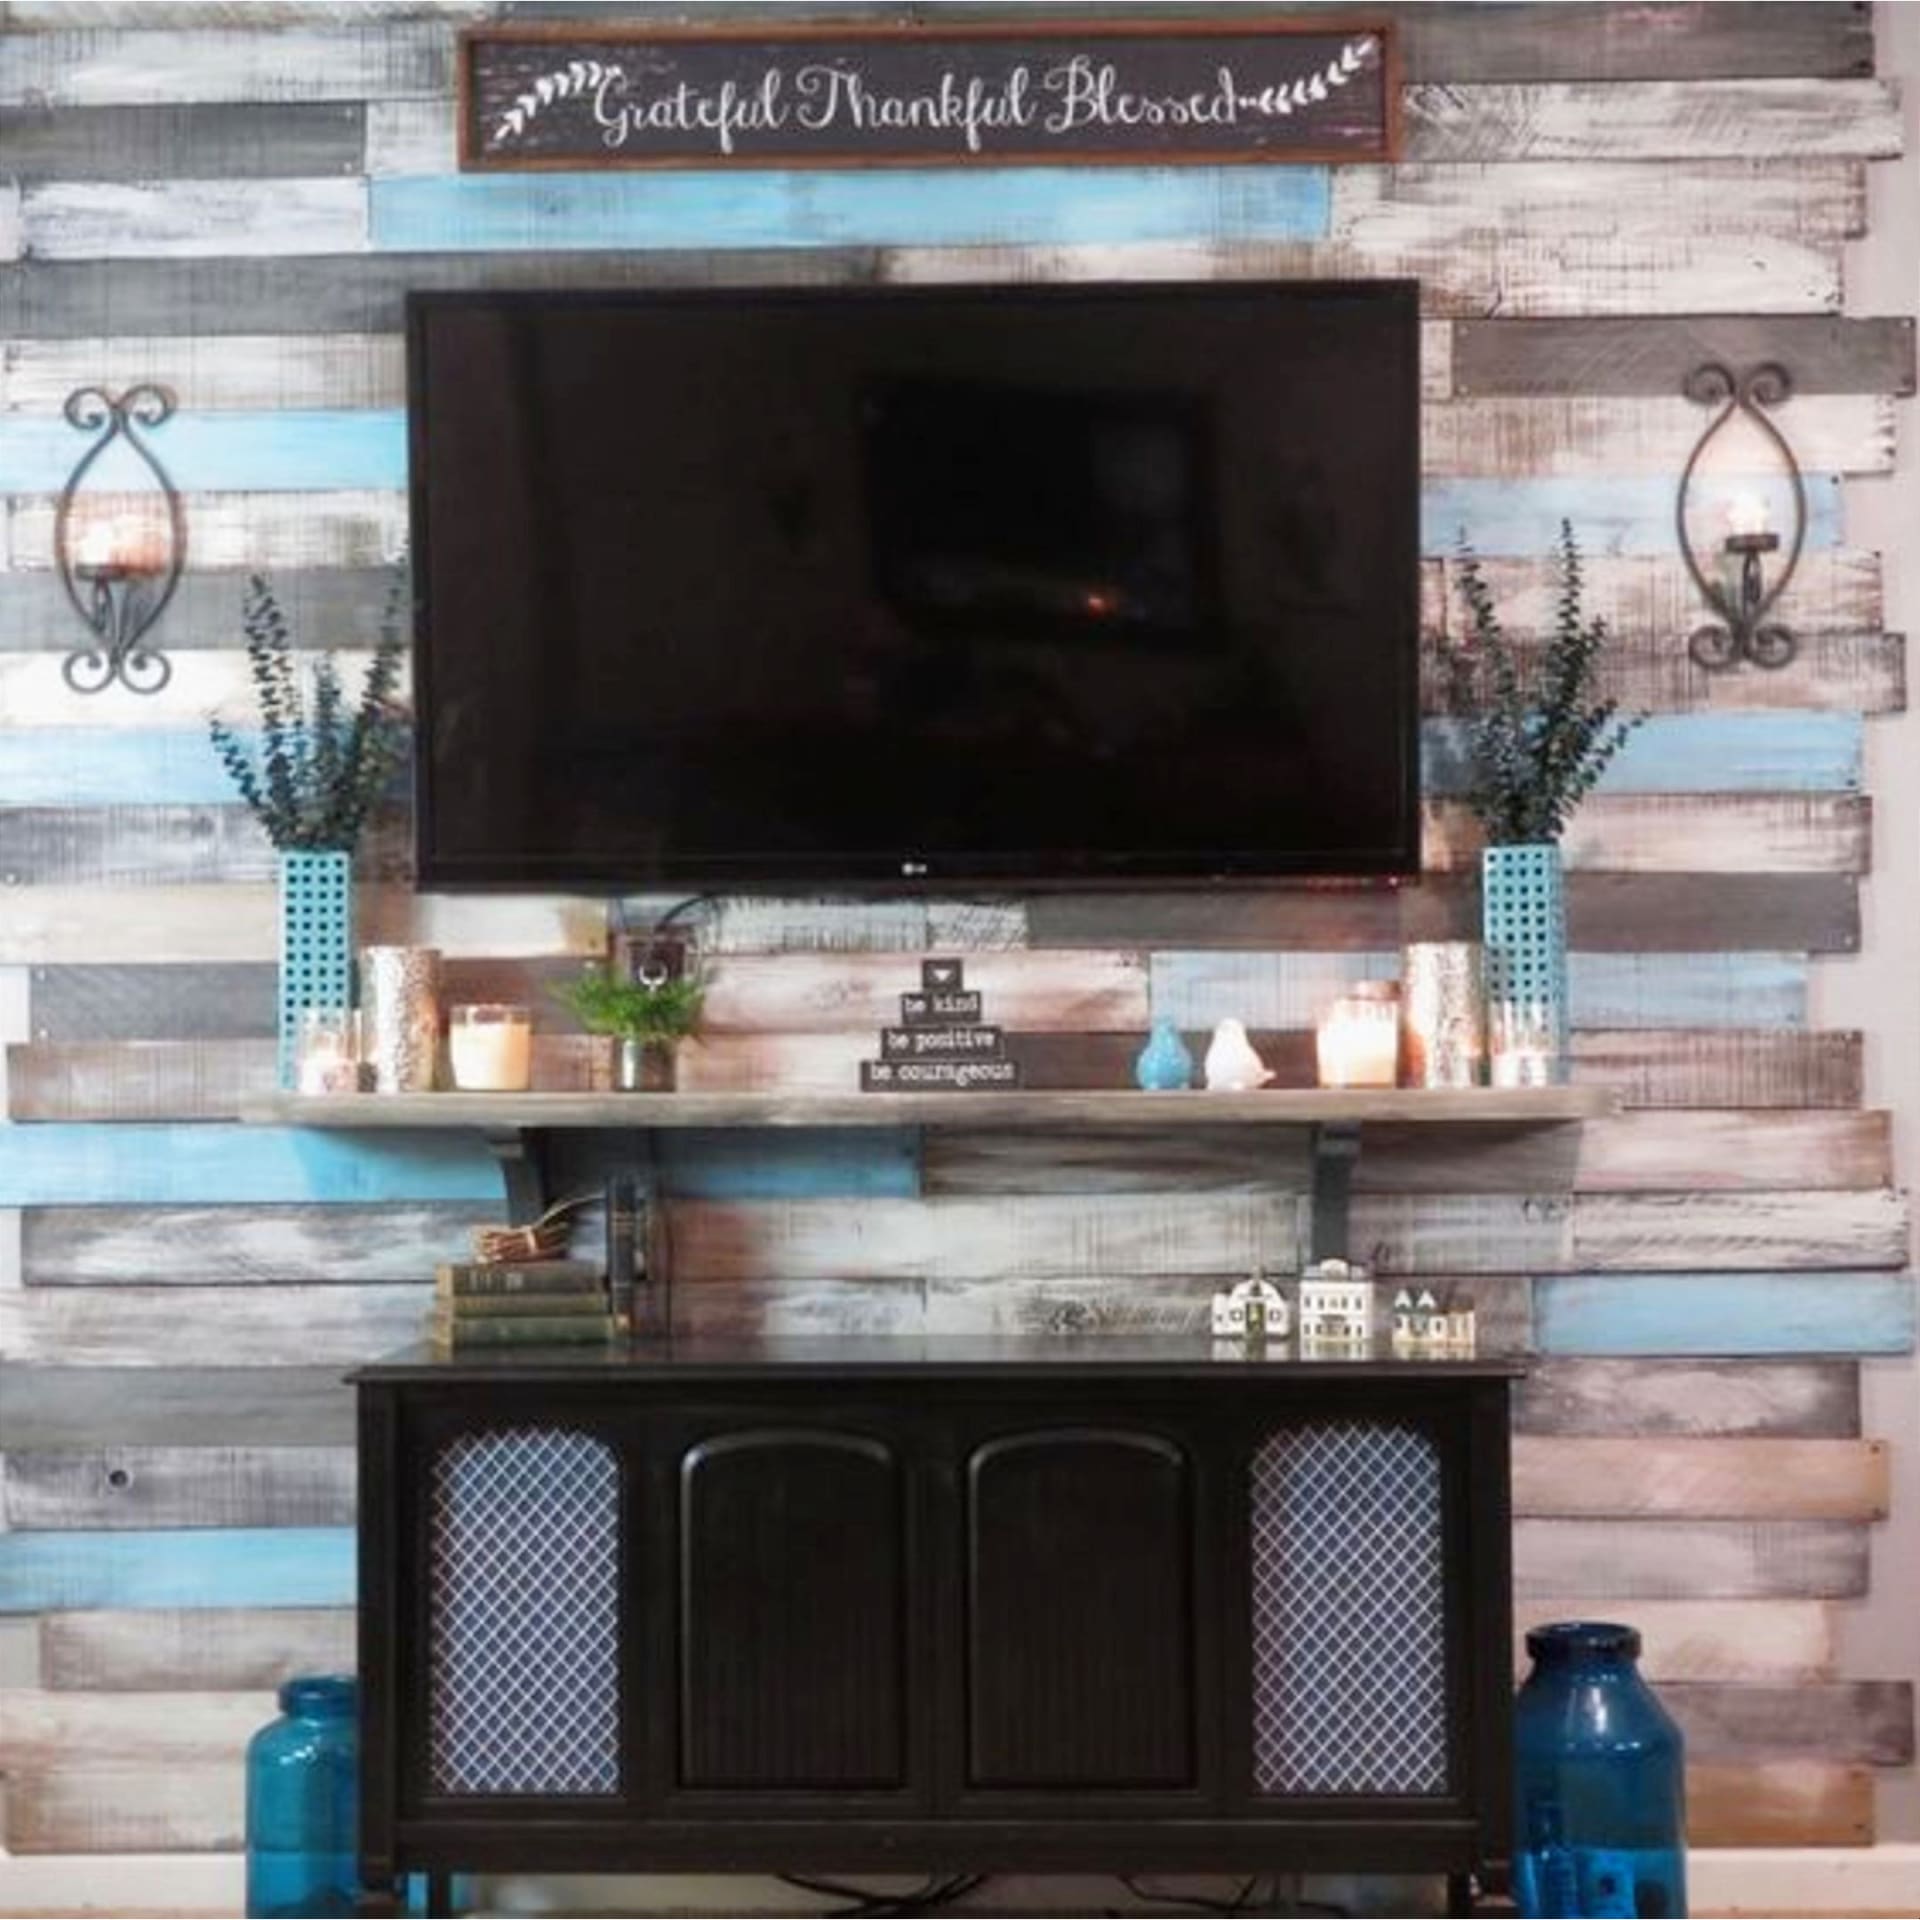 Warm and Cozy living room wall colors - living room rustic pallet wall behind TV - cozy grey small living room ideas on a budget in neutral colors with pops of color